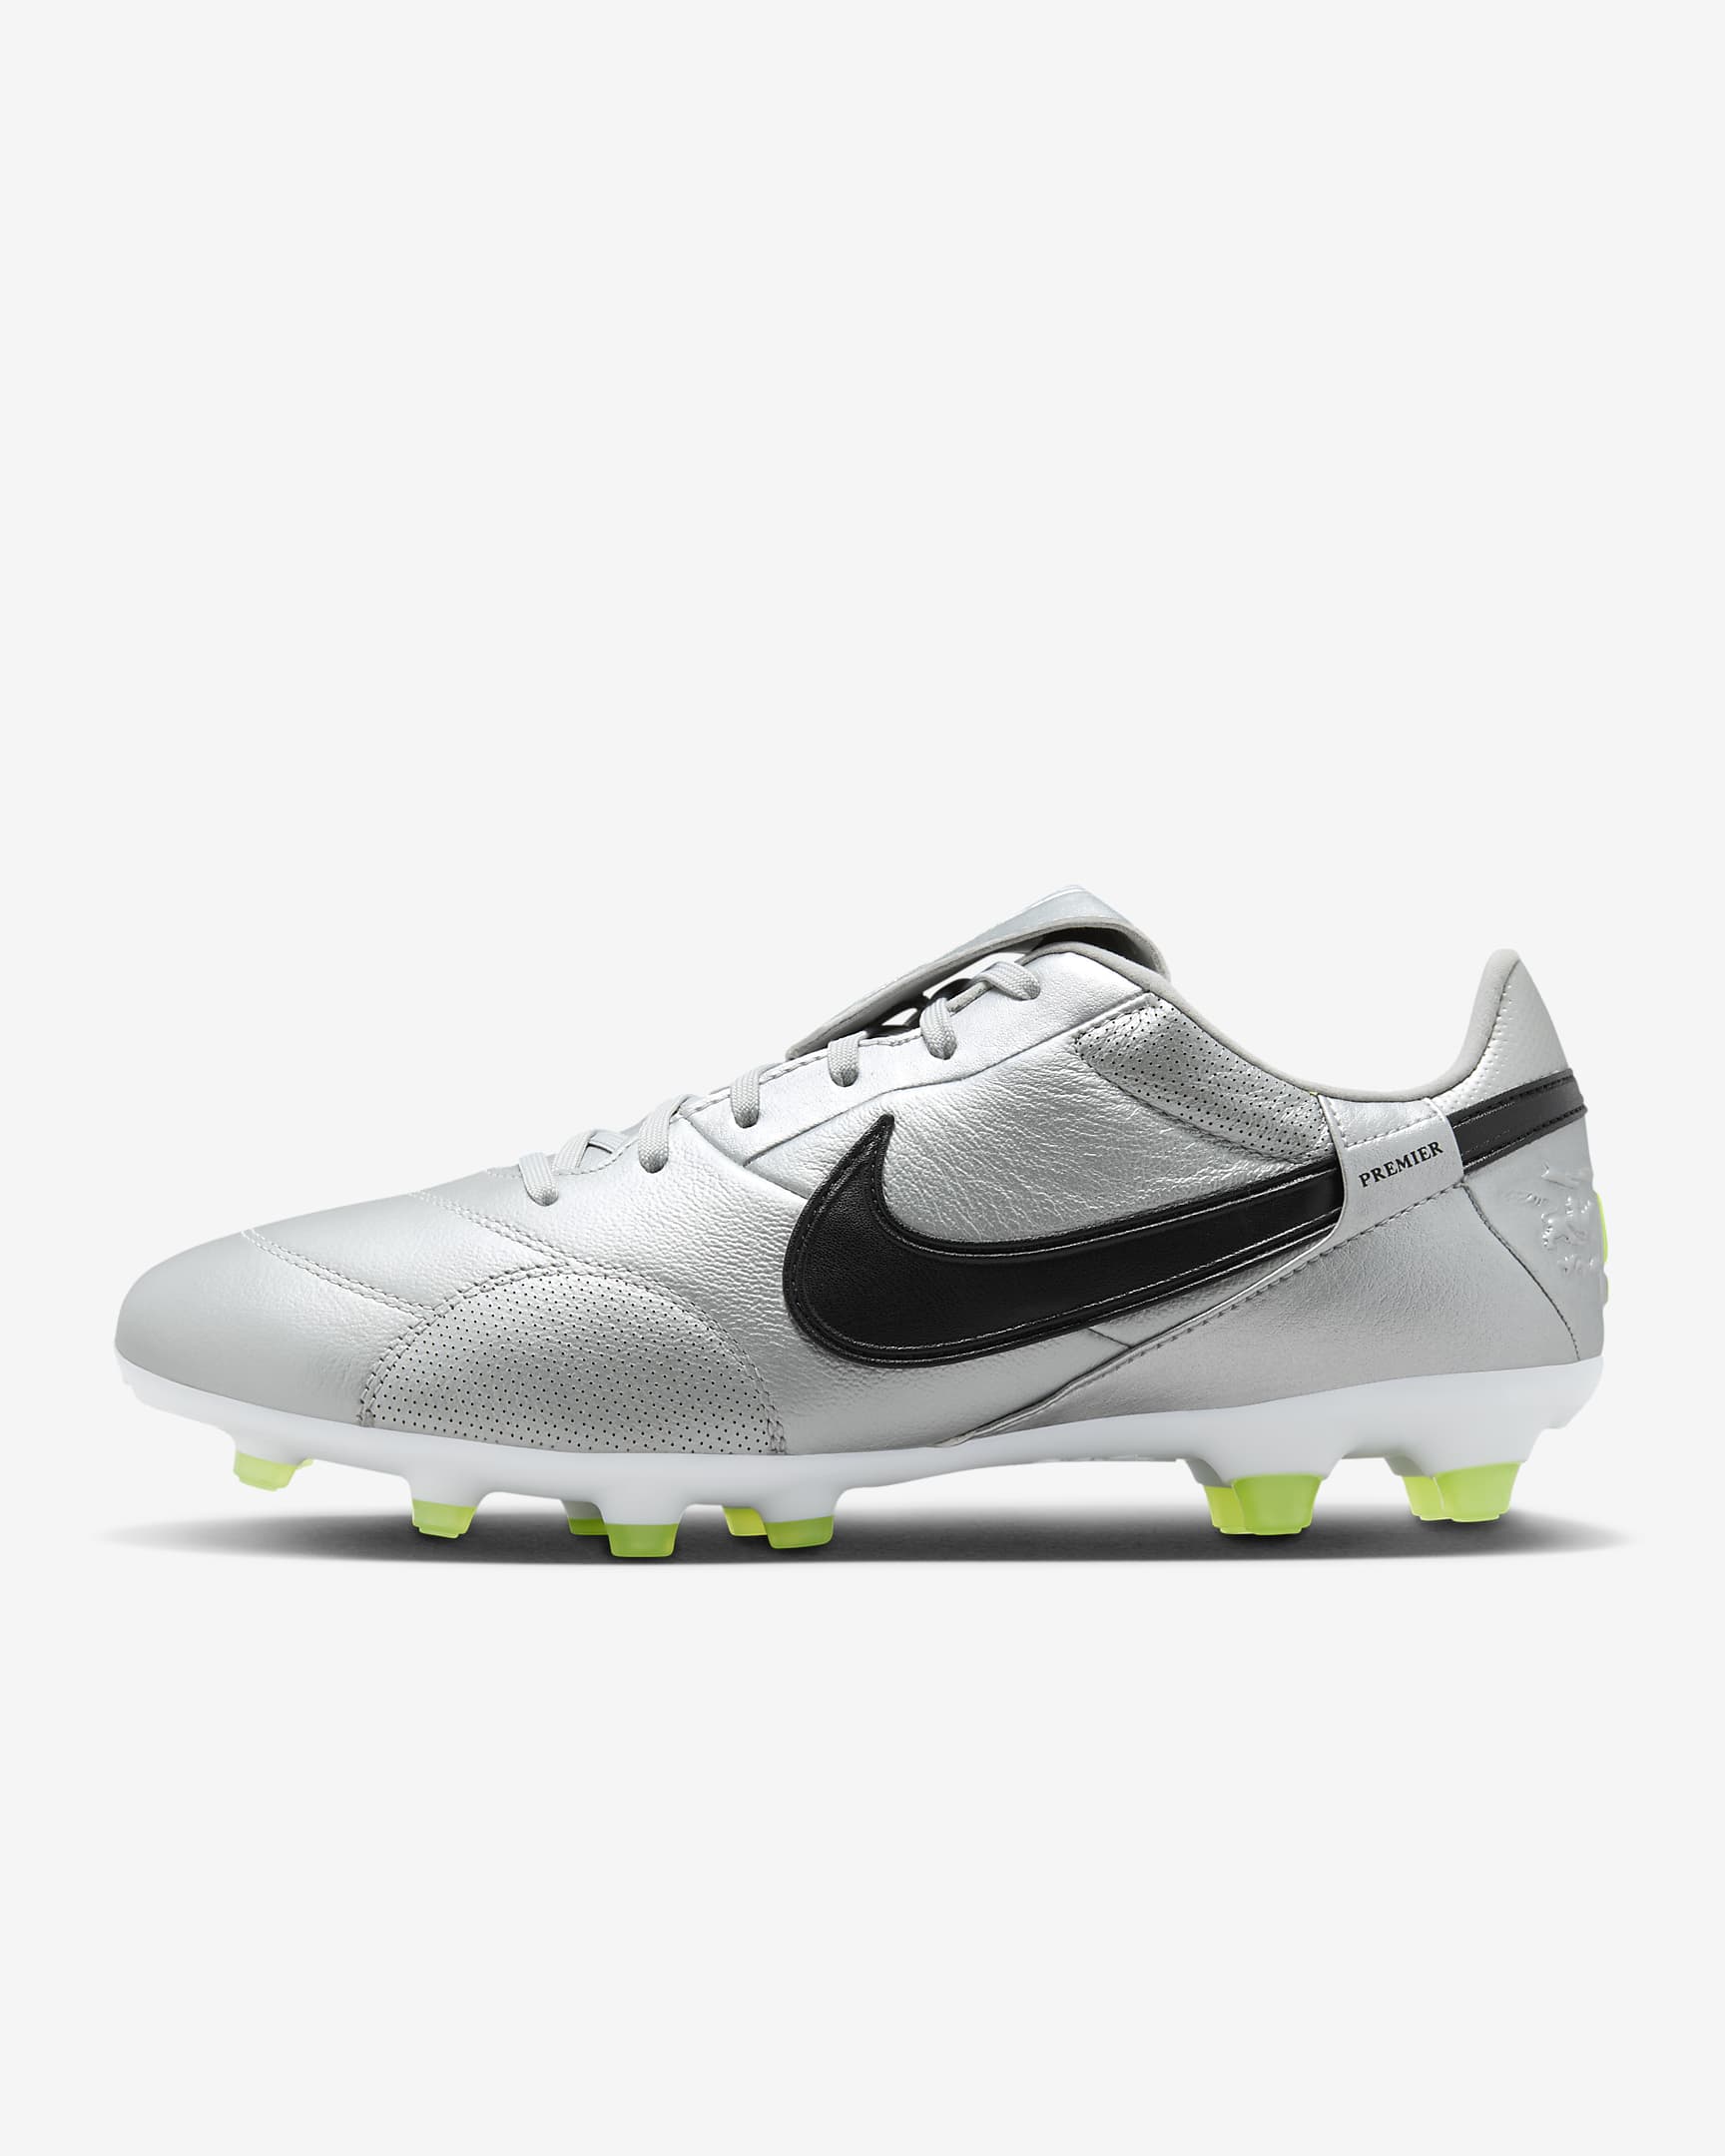 NikePremier 3 Firm-Ground Football Boot. Nike IL